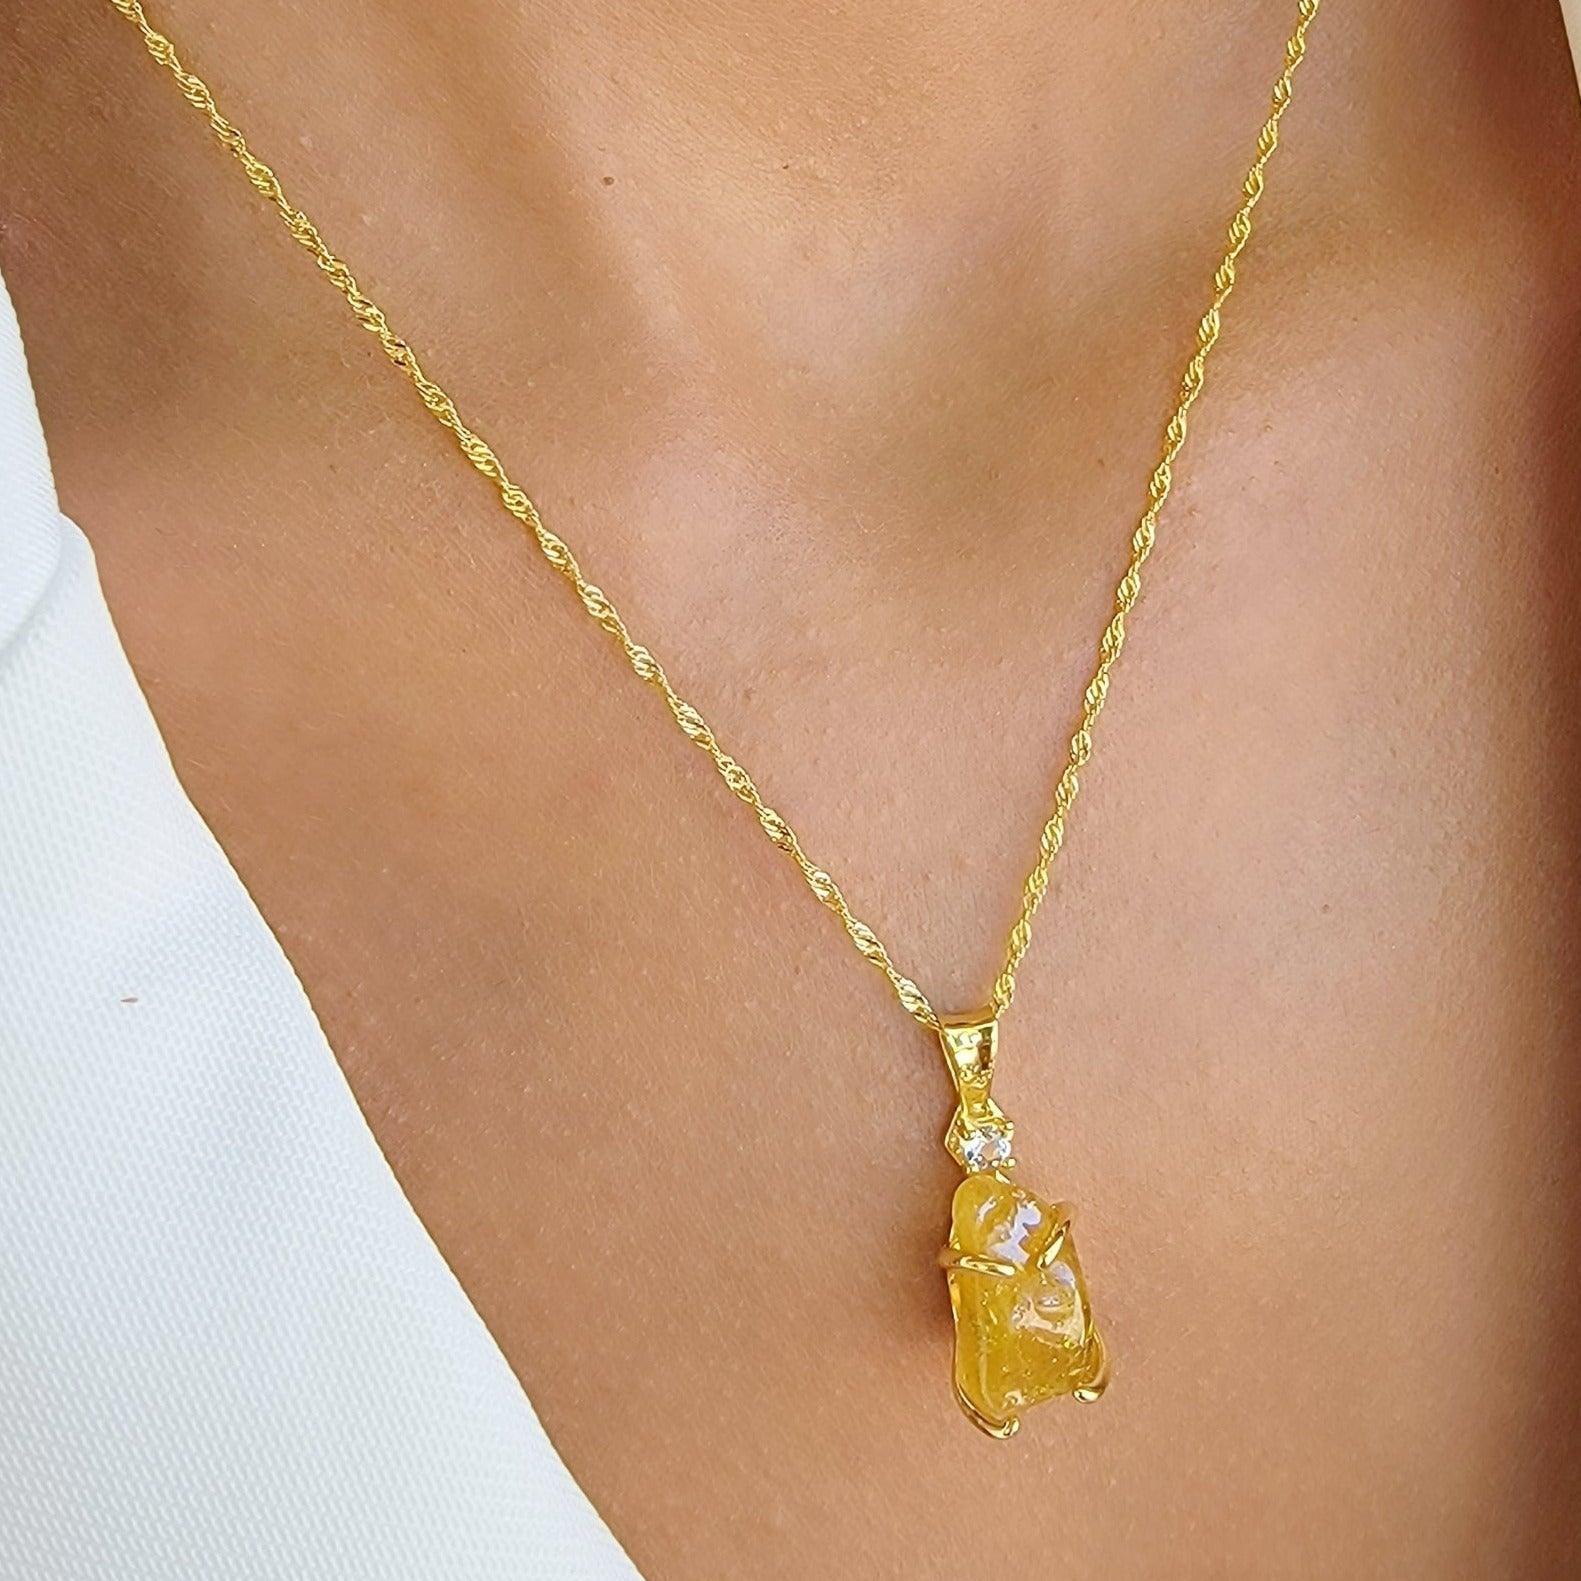 Raw Yellow Sapphire Necklace Sterling Silver - Uniquelan Jewelry